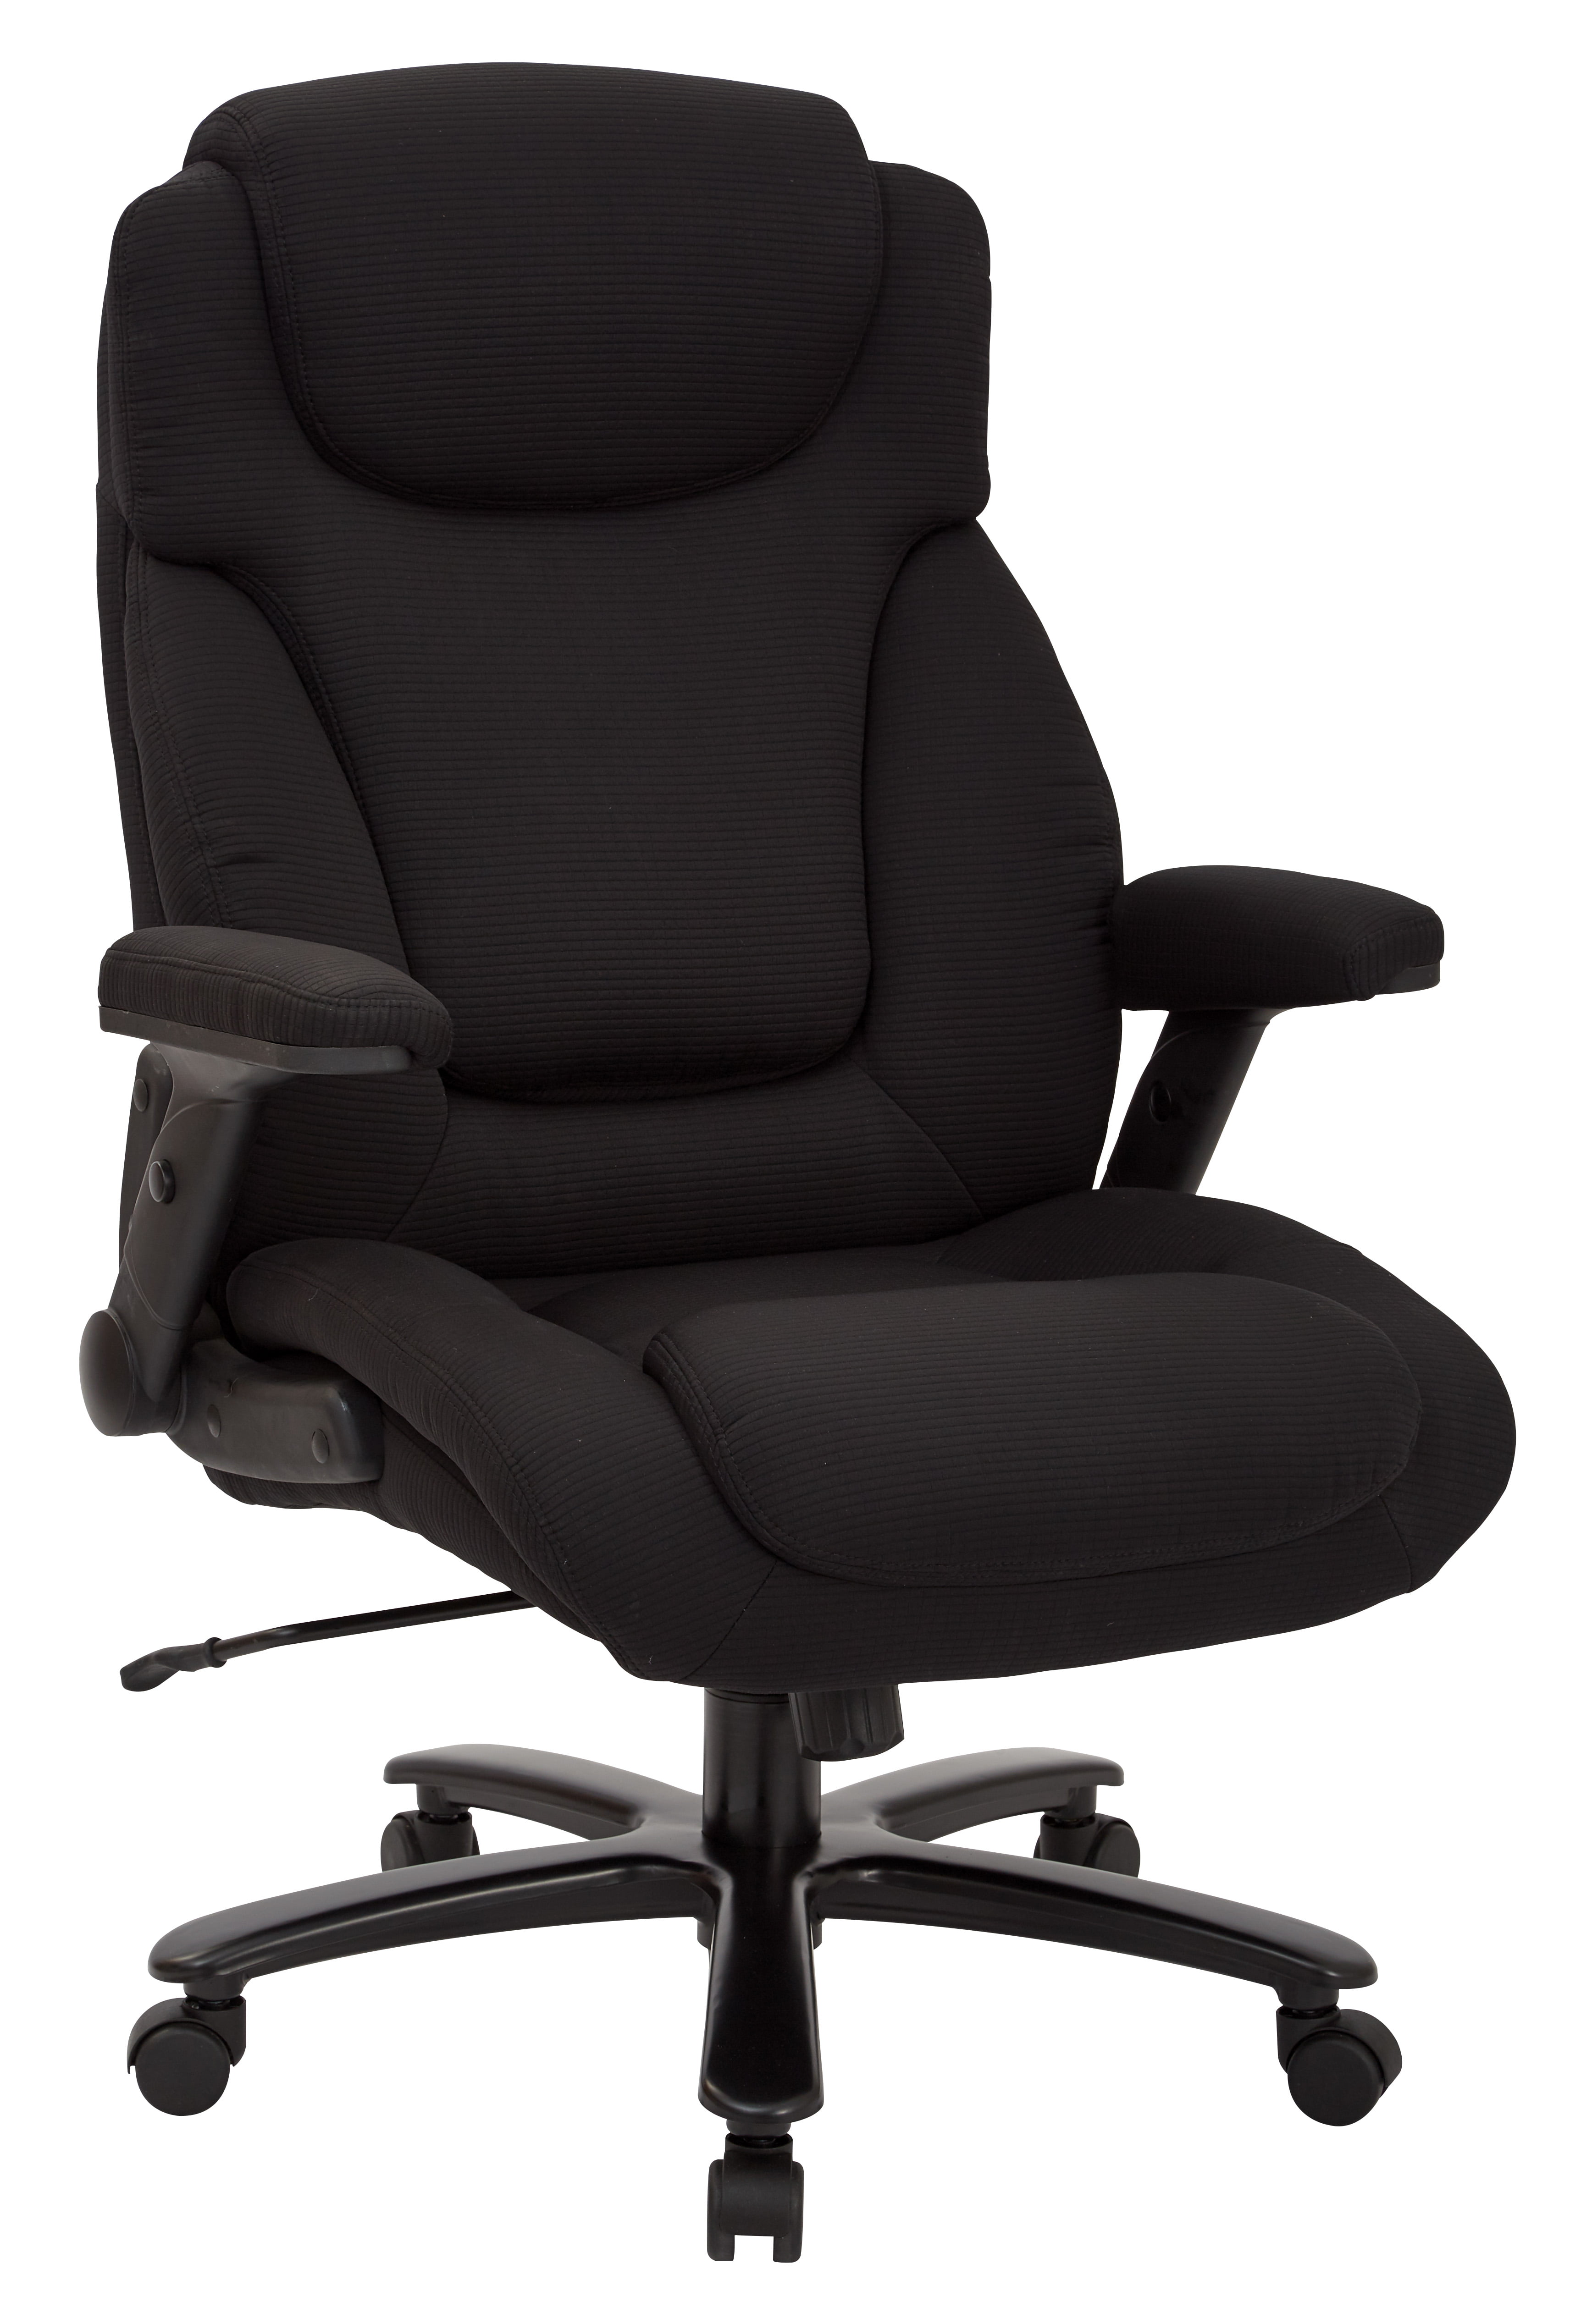 office chair for big and tall